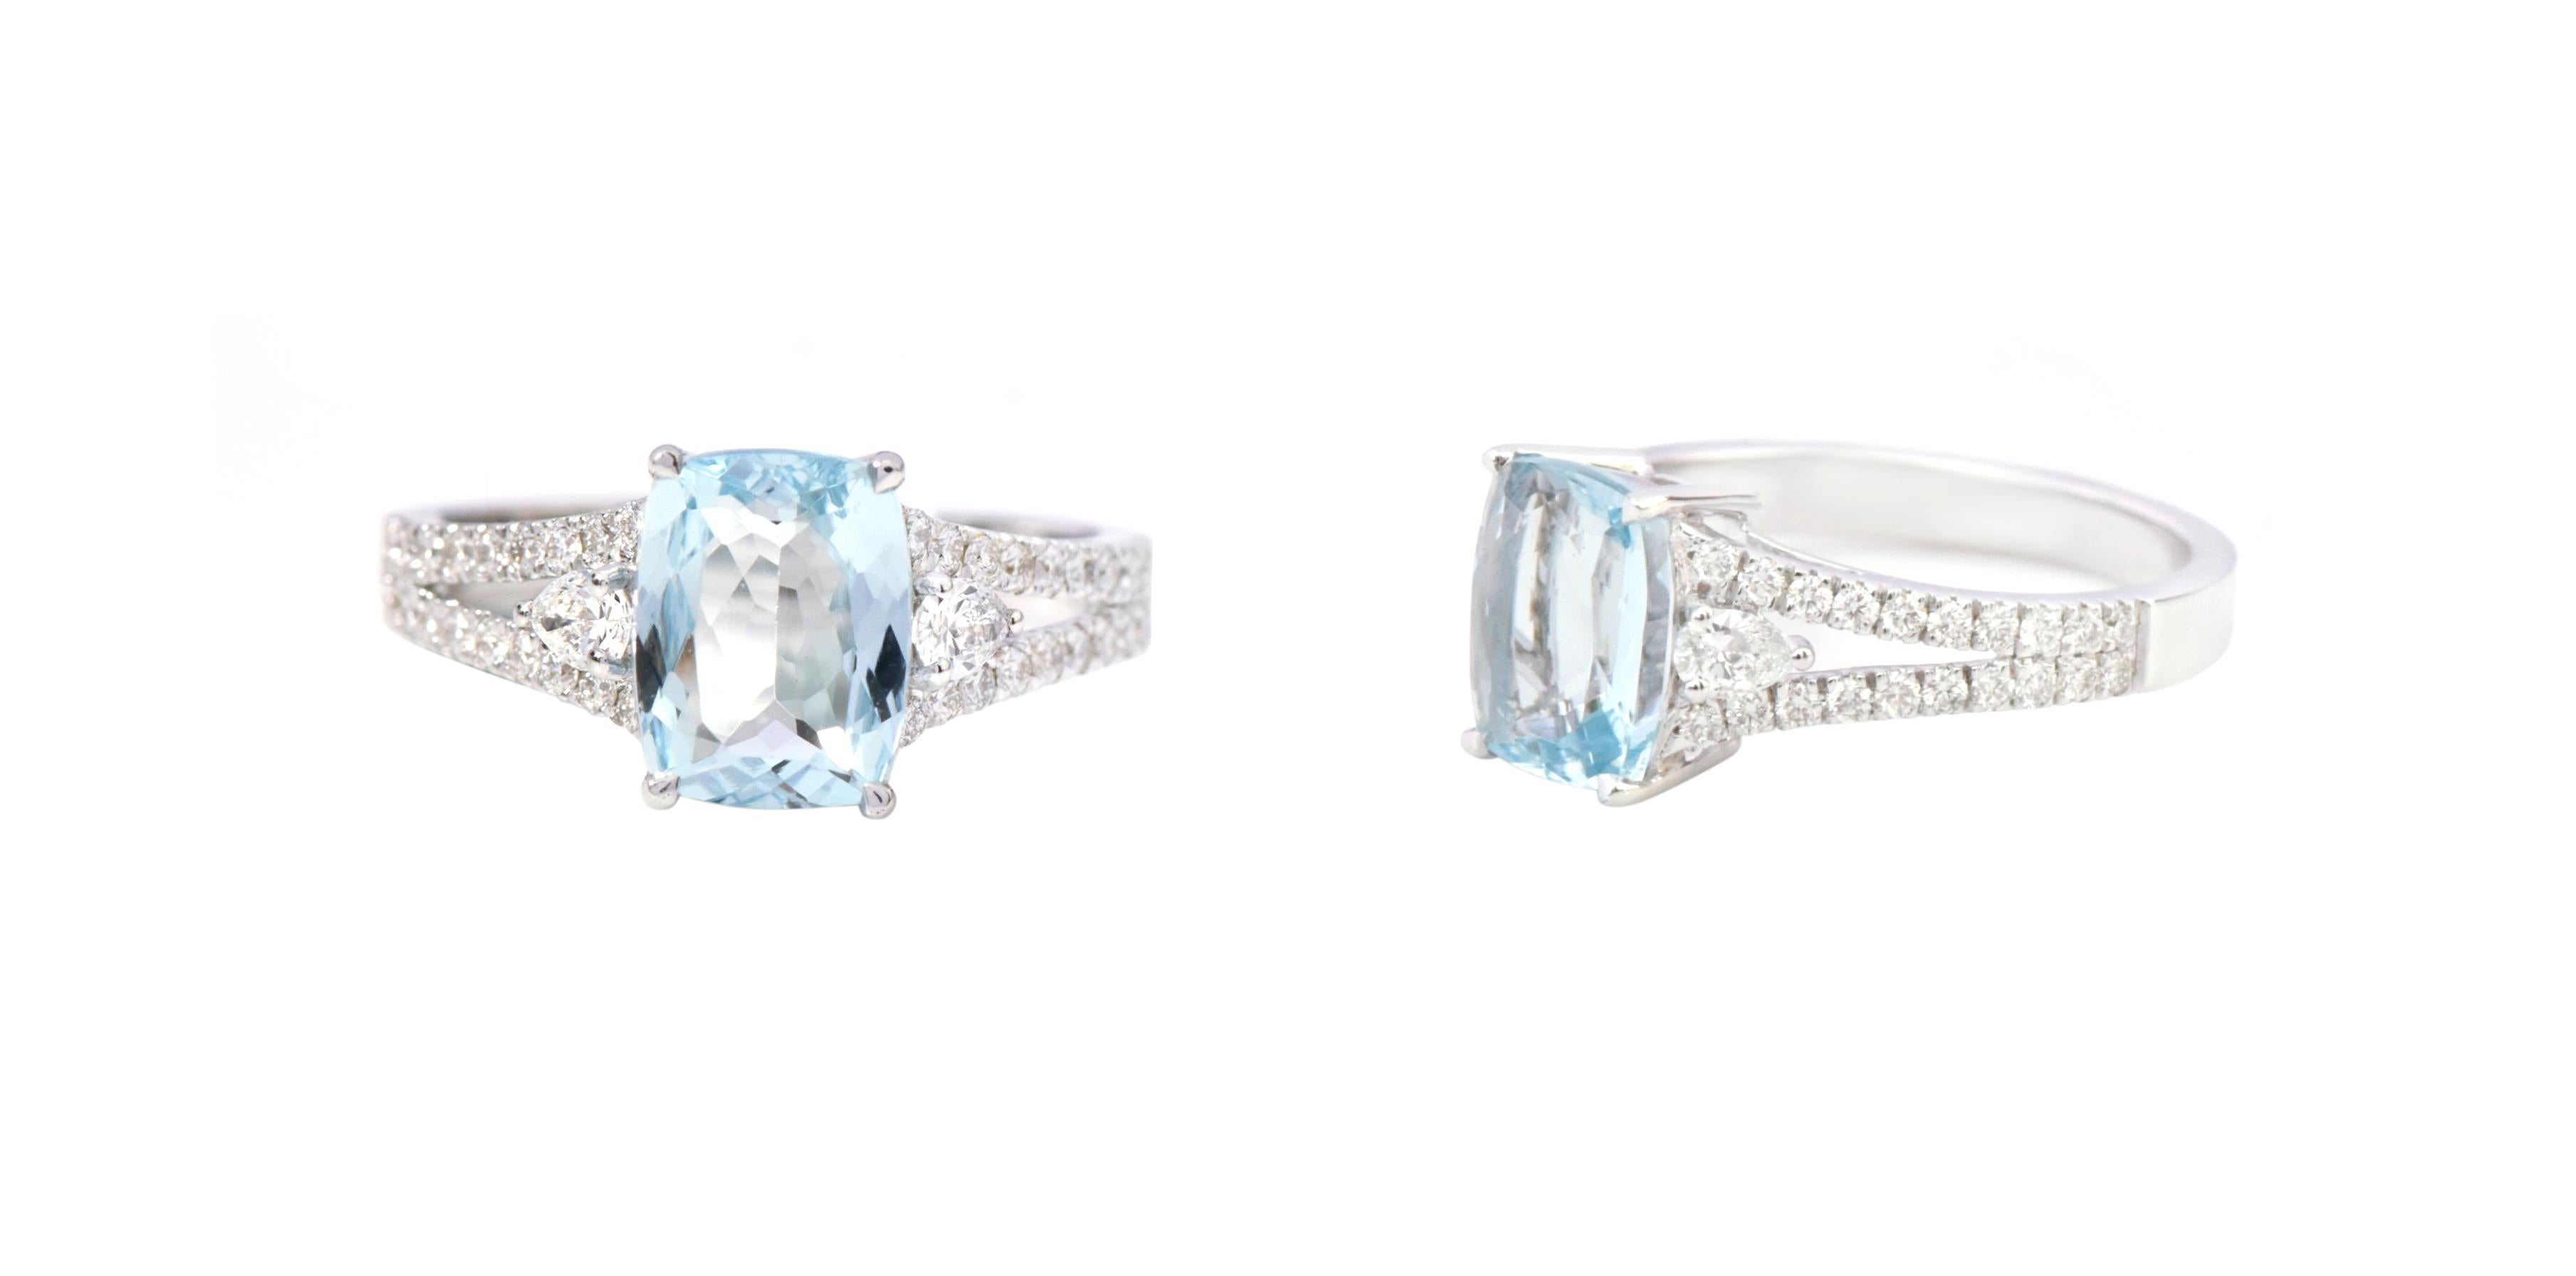 18 Karat White Gold 1.87 Carat Cushion-Cut Aquamarine and Diamond Eternity Ring

This magnificent celestial aquamarine and diamond ring is captivating. The three-stone trinity ring tells a story by not only representing the said “past, present, and